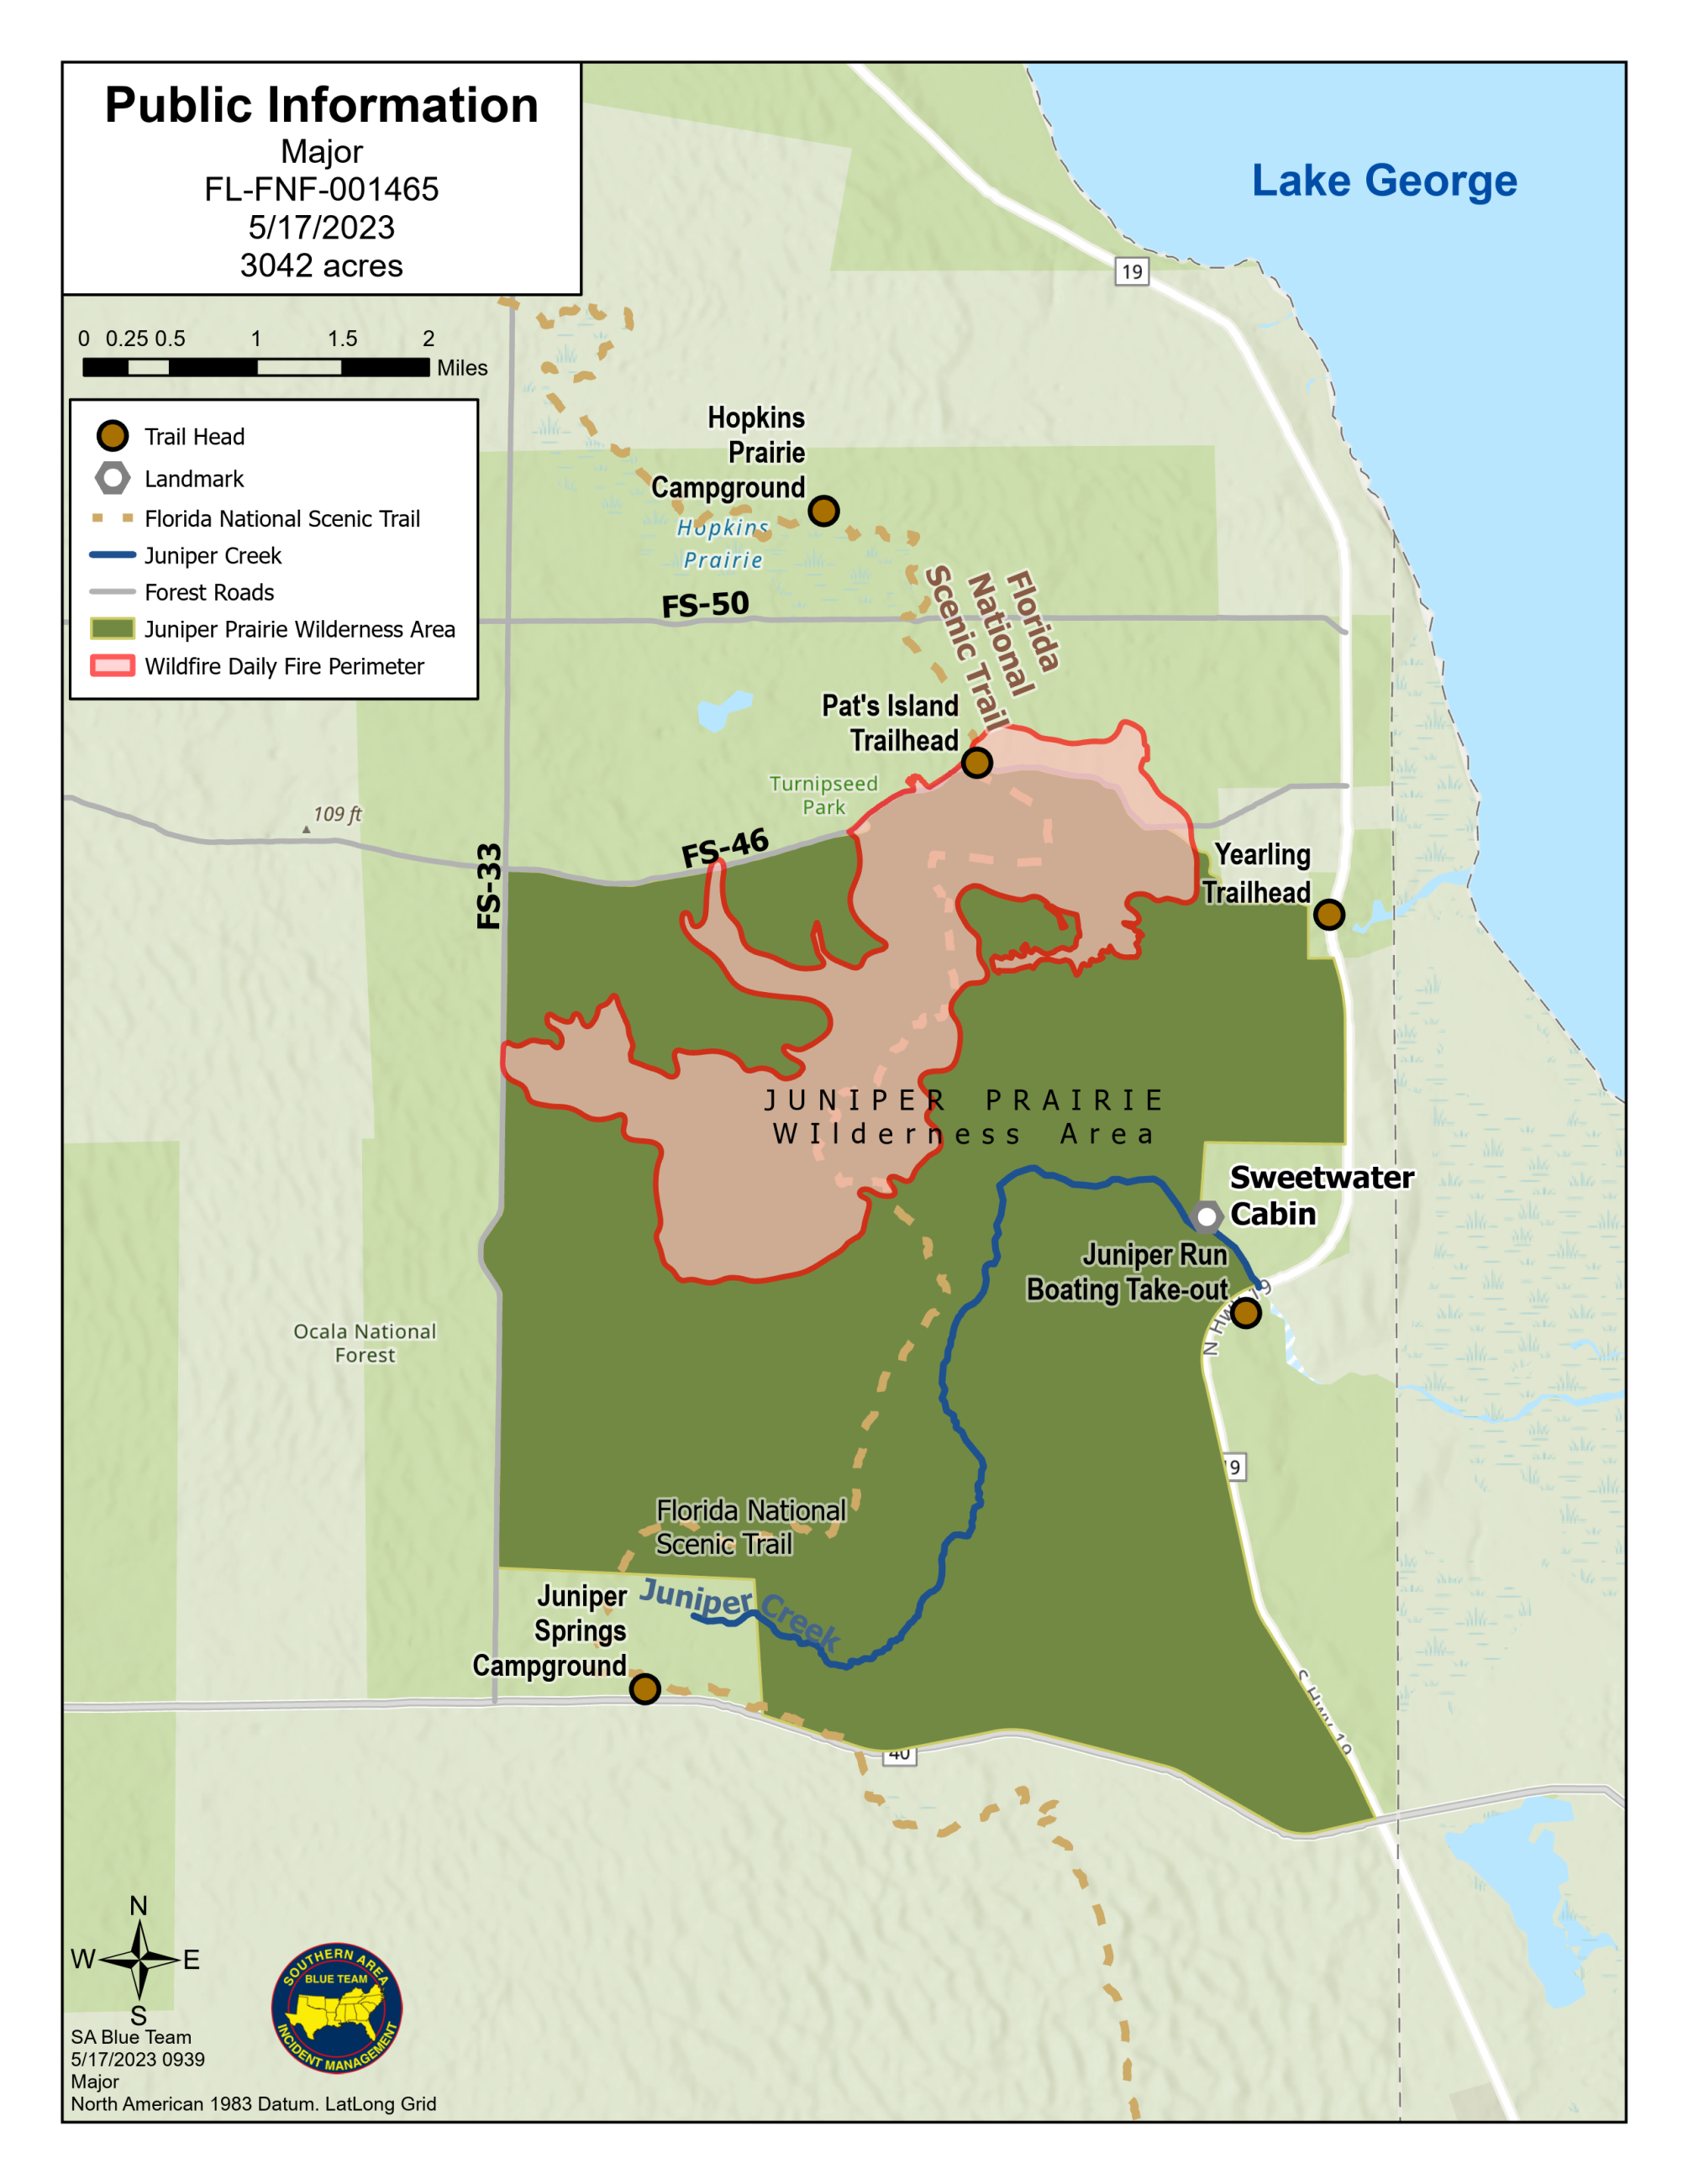 Map for Major Fire for May 17th 2023